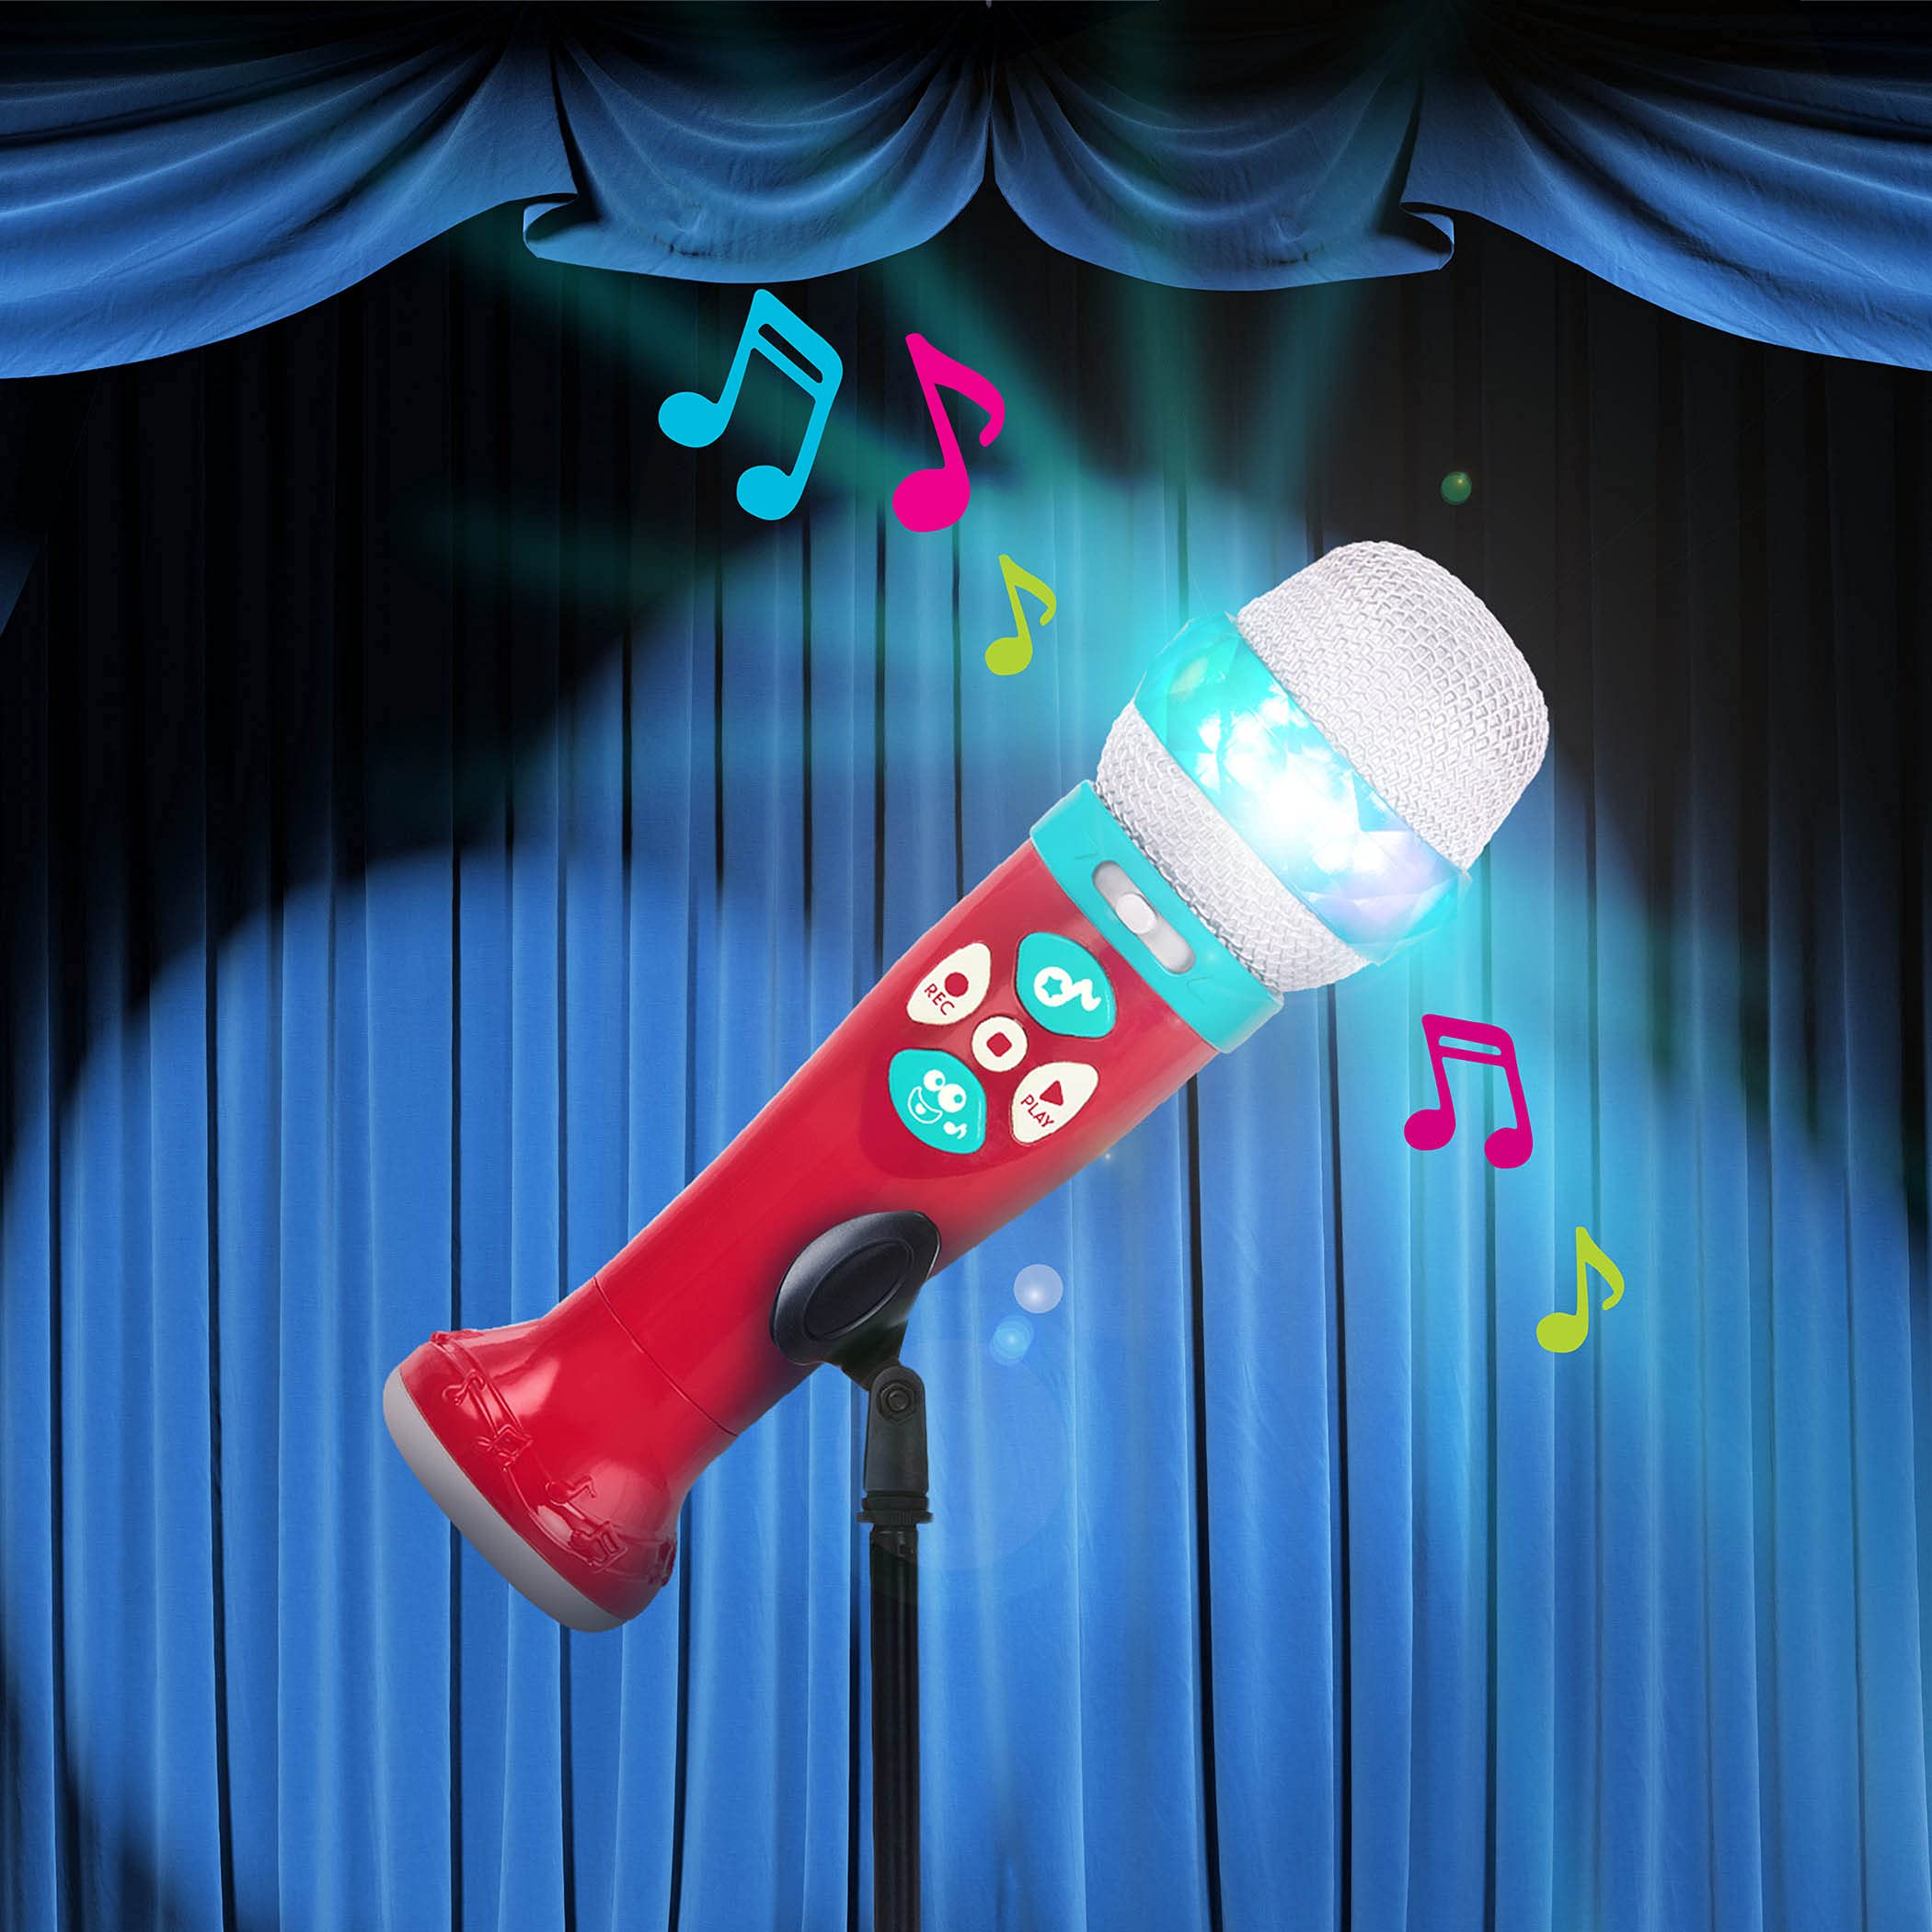 Battat – Musical Light Show Microphone – Light-Up Sing-Along Mic with 5 Songs and Record Functions for Kids 2 Years + (Bluetooth)